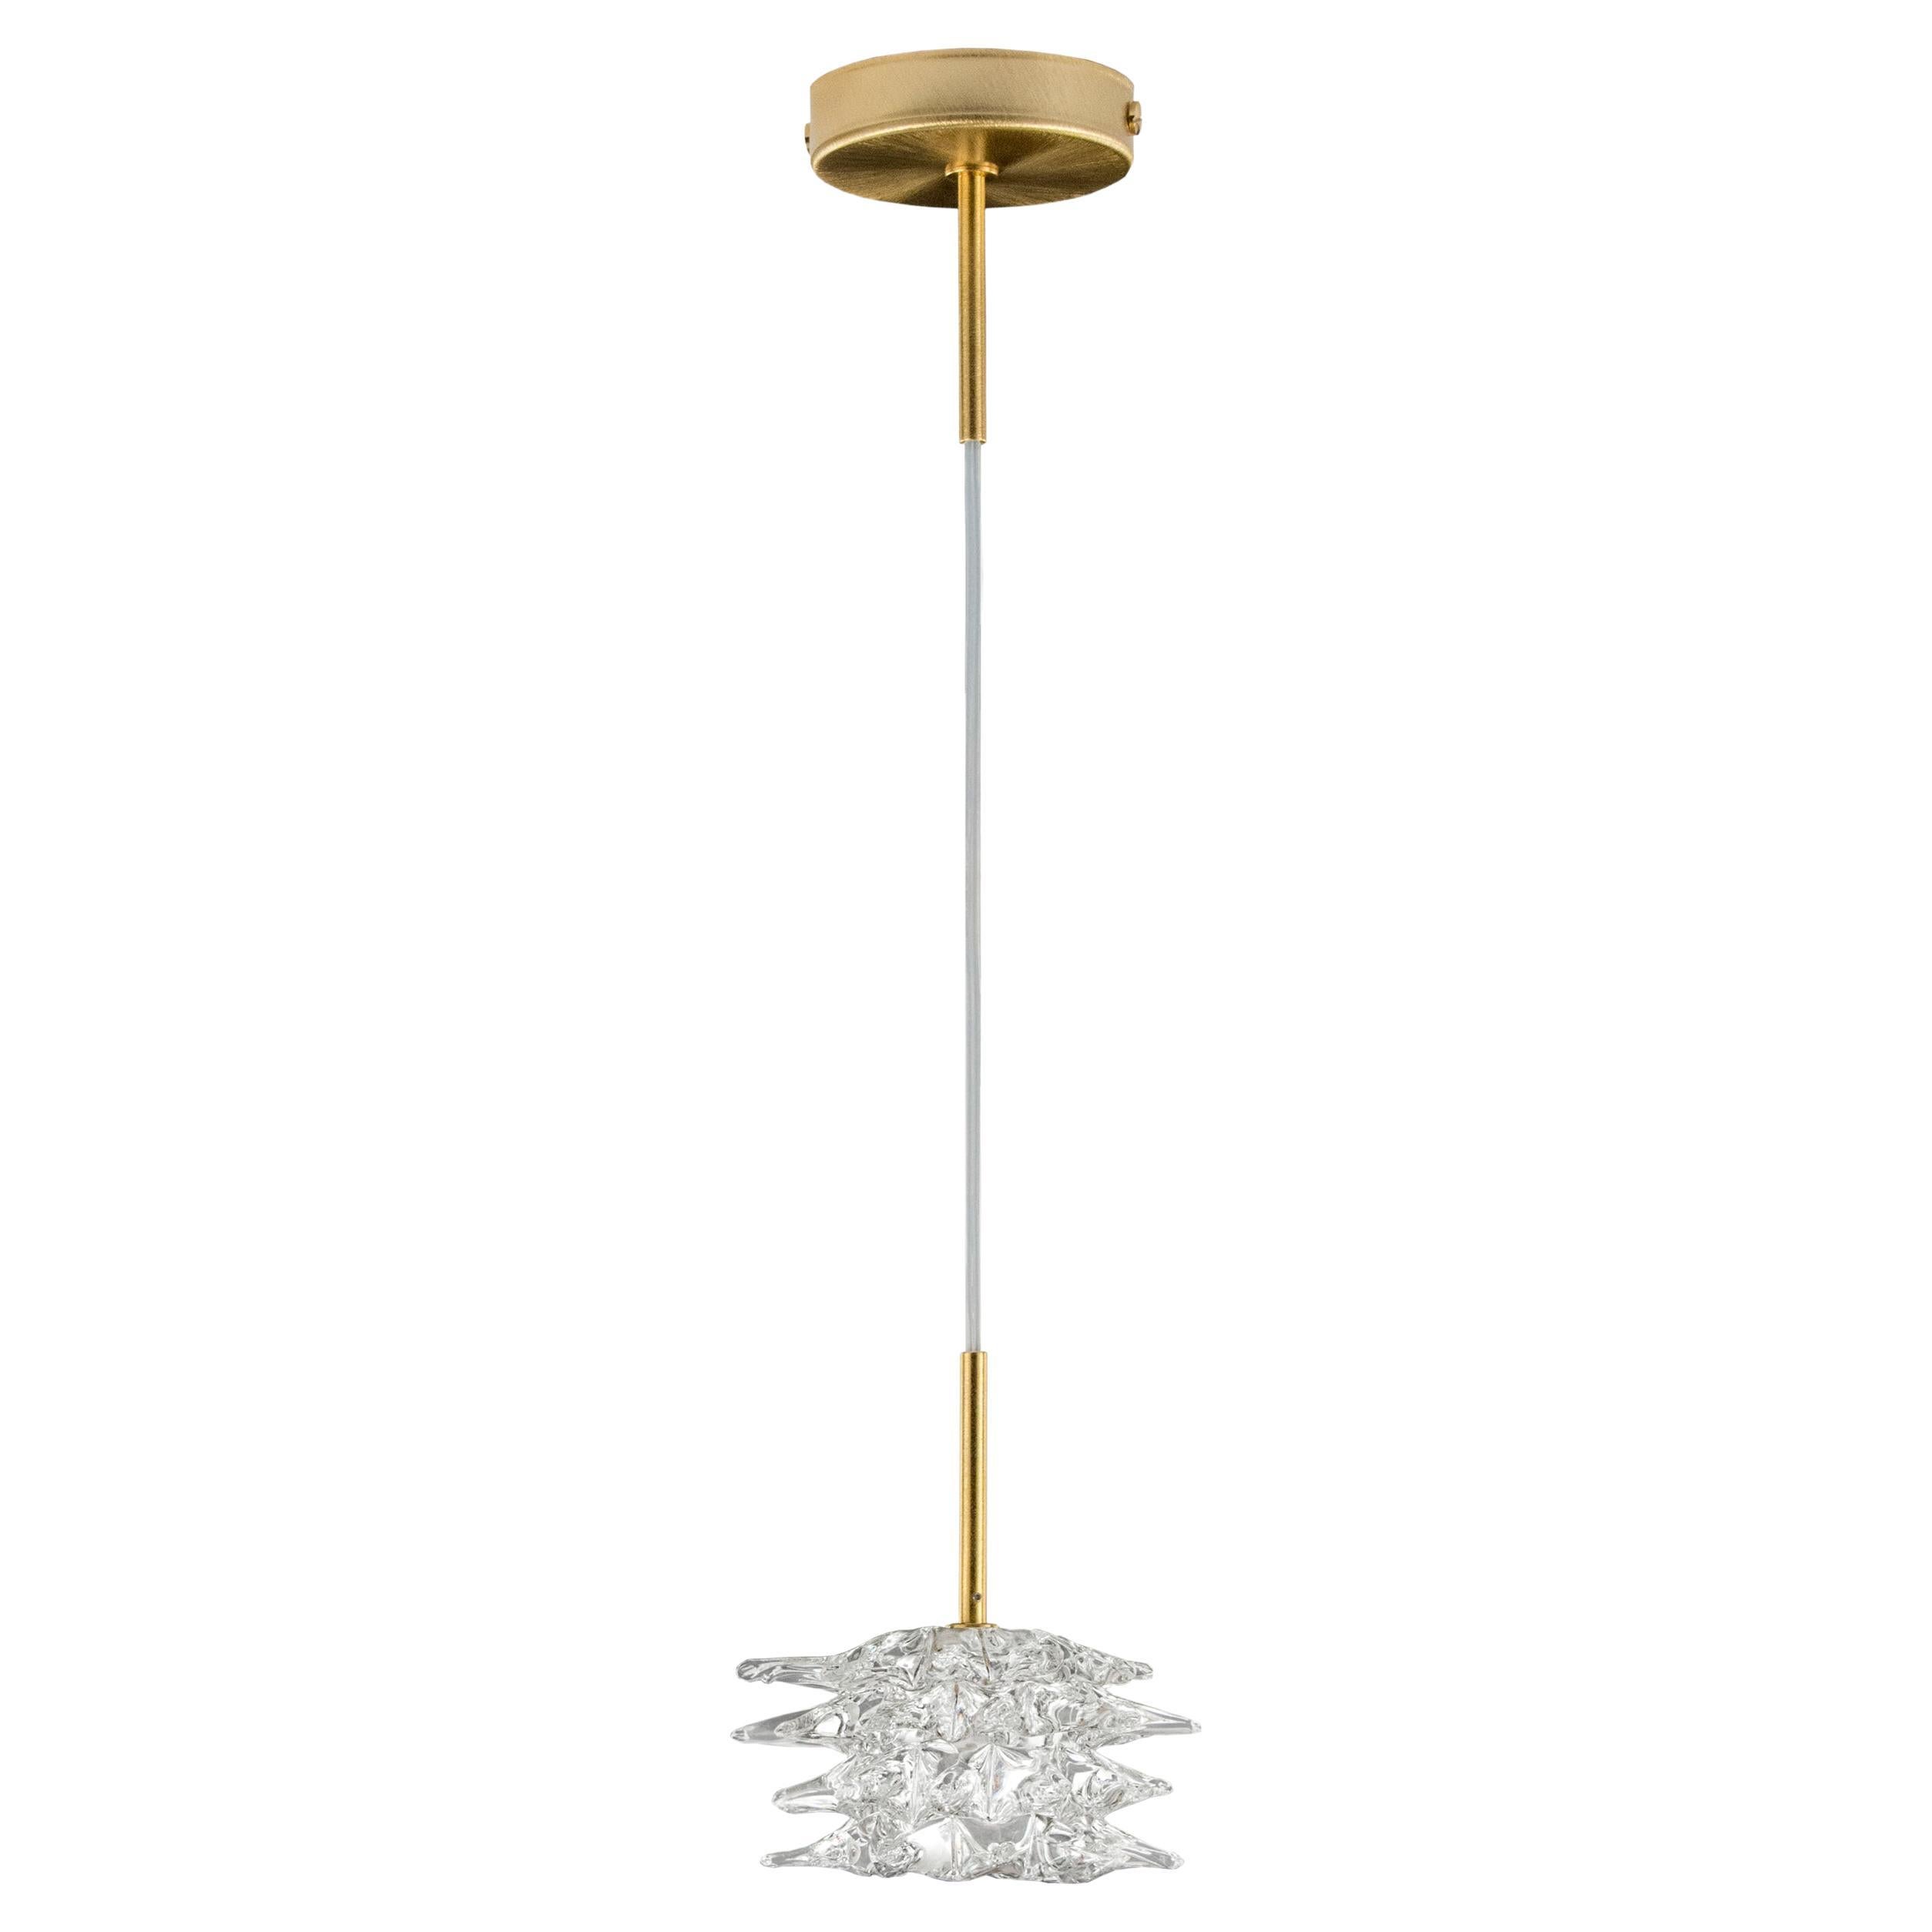 Artistic Suspension 1 Light, Clear Murano Glass, Gold Fixture by Multiforme